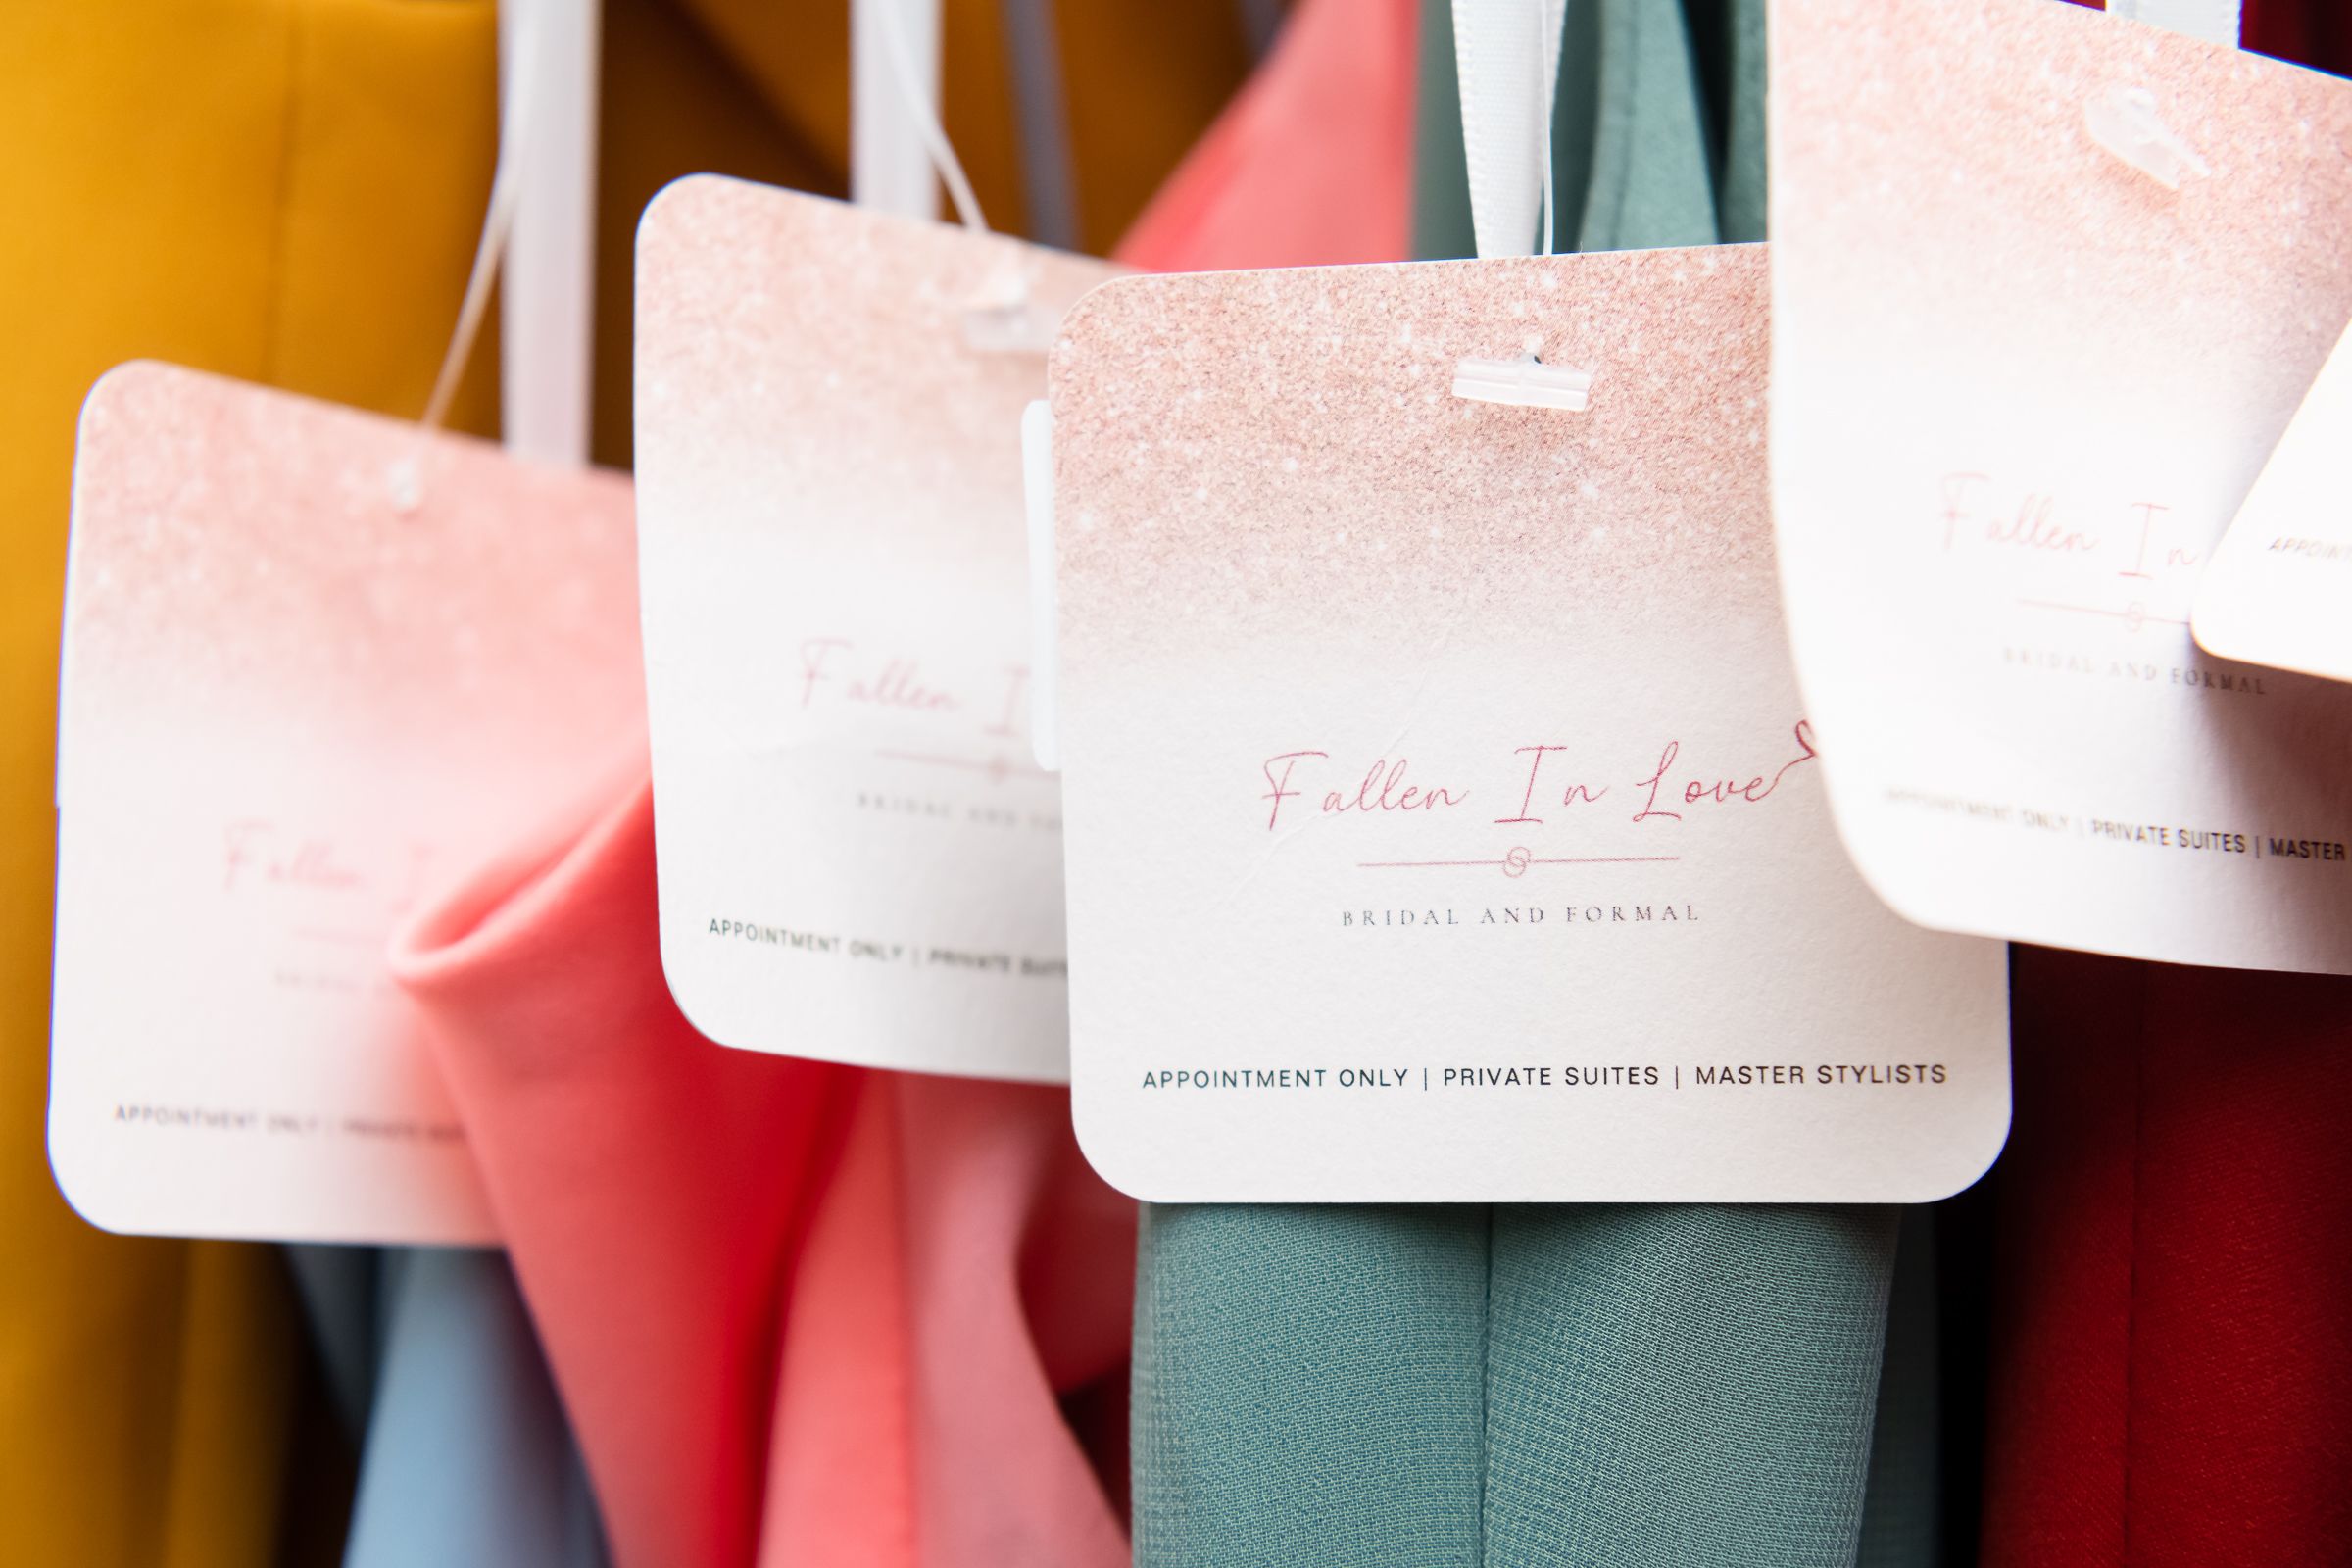 Tags hang on bridesmaid dresses that say Fallen In Love.